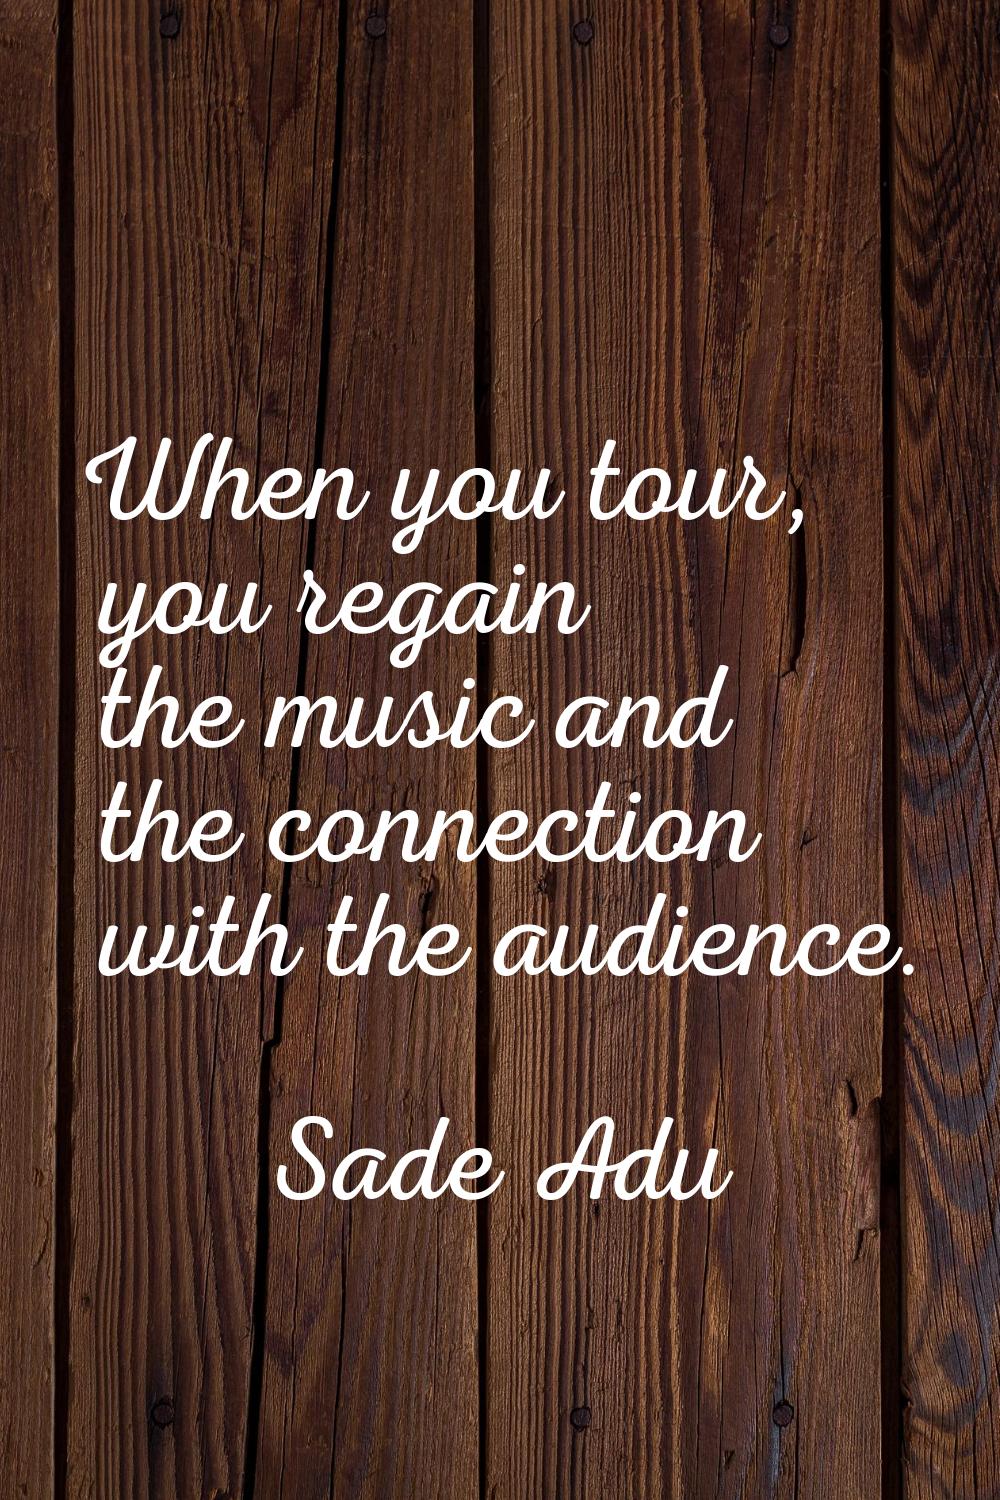 When you tour, you regain the music and the connection with the audience.